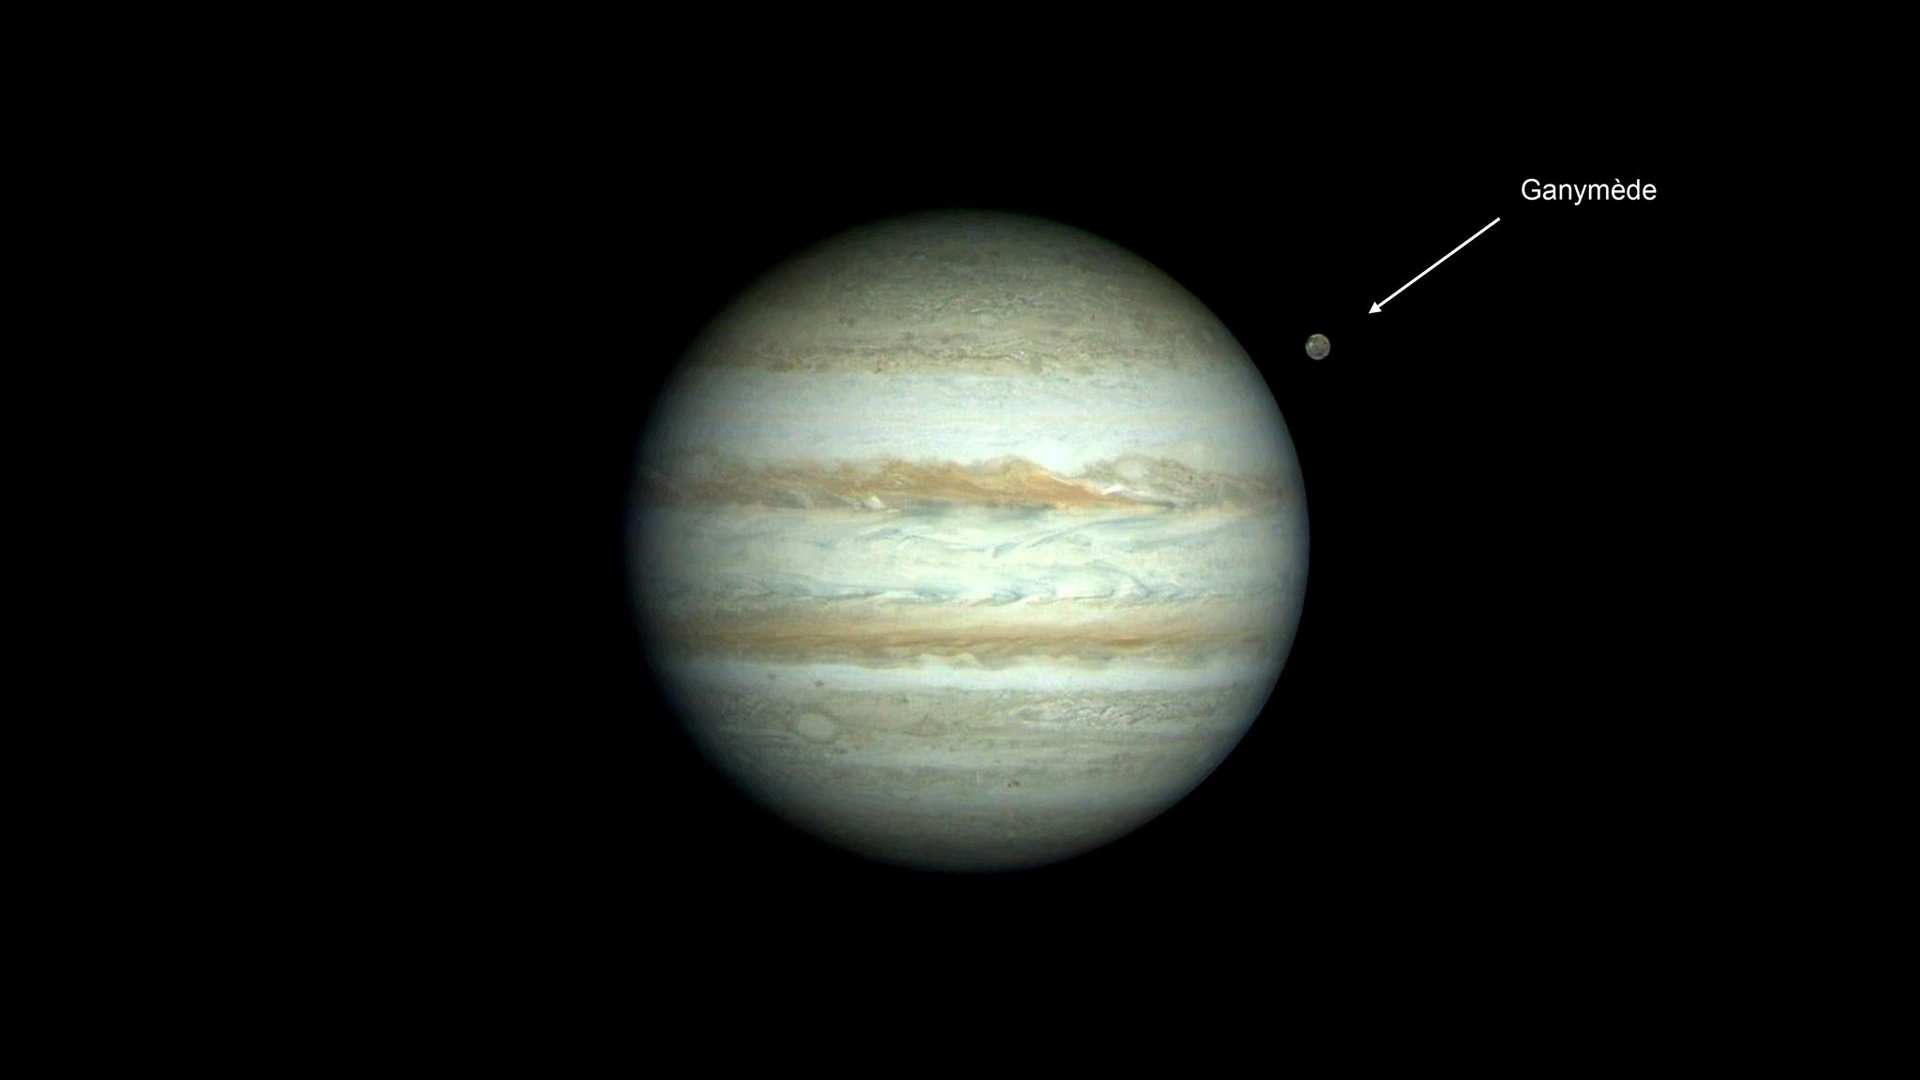 Jupiter and its largest moon Ganymede photographed by Europe's Earth-observing spacecraft Pleiades Neo.